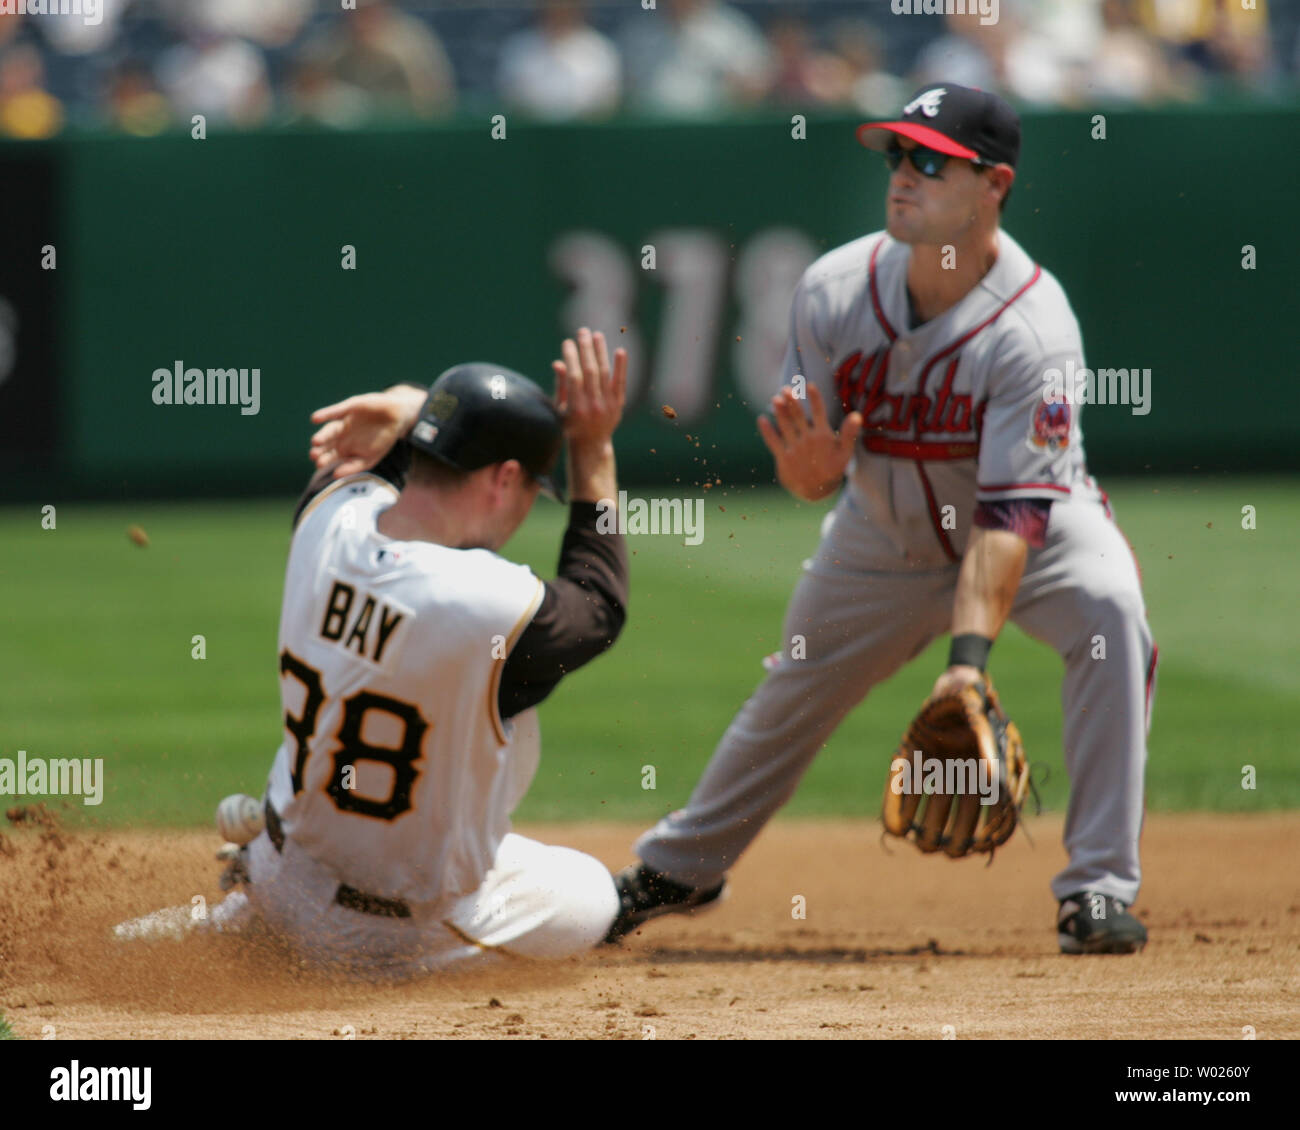 Second basemen Marcus Giles of the Atlanta Braves awaits the throw from Brian McCann as Jason Bay of the Pittsburgh Pirates slides into second, during the first inning at PNC Park in Pittsburgh, Penn., on August 3, 2006.  (UPI Photo/Stephen Gross) Stock Photo